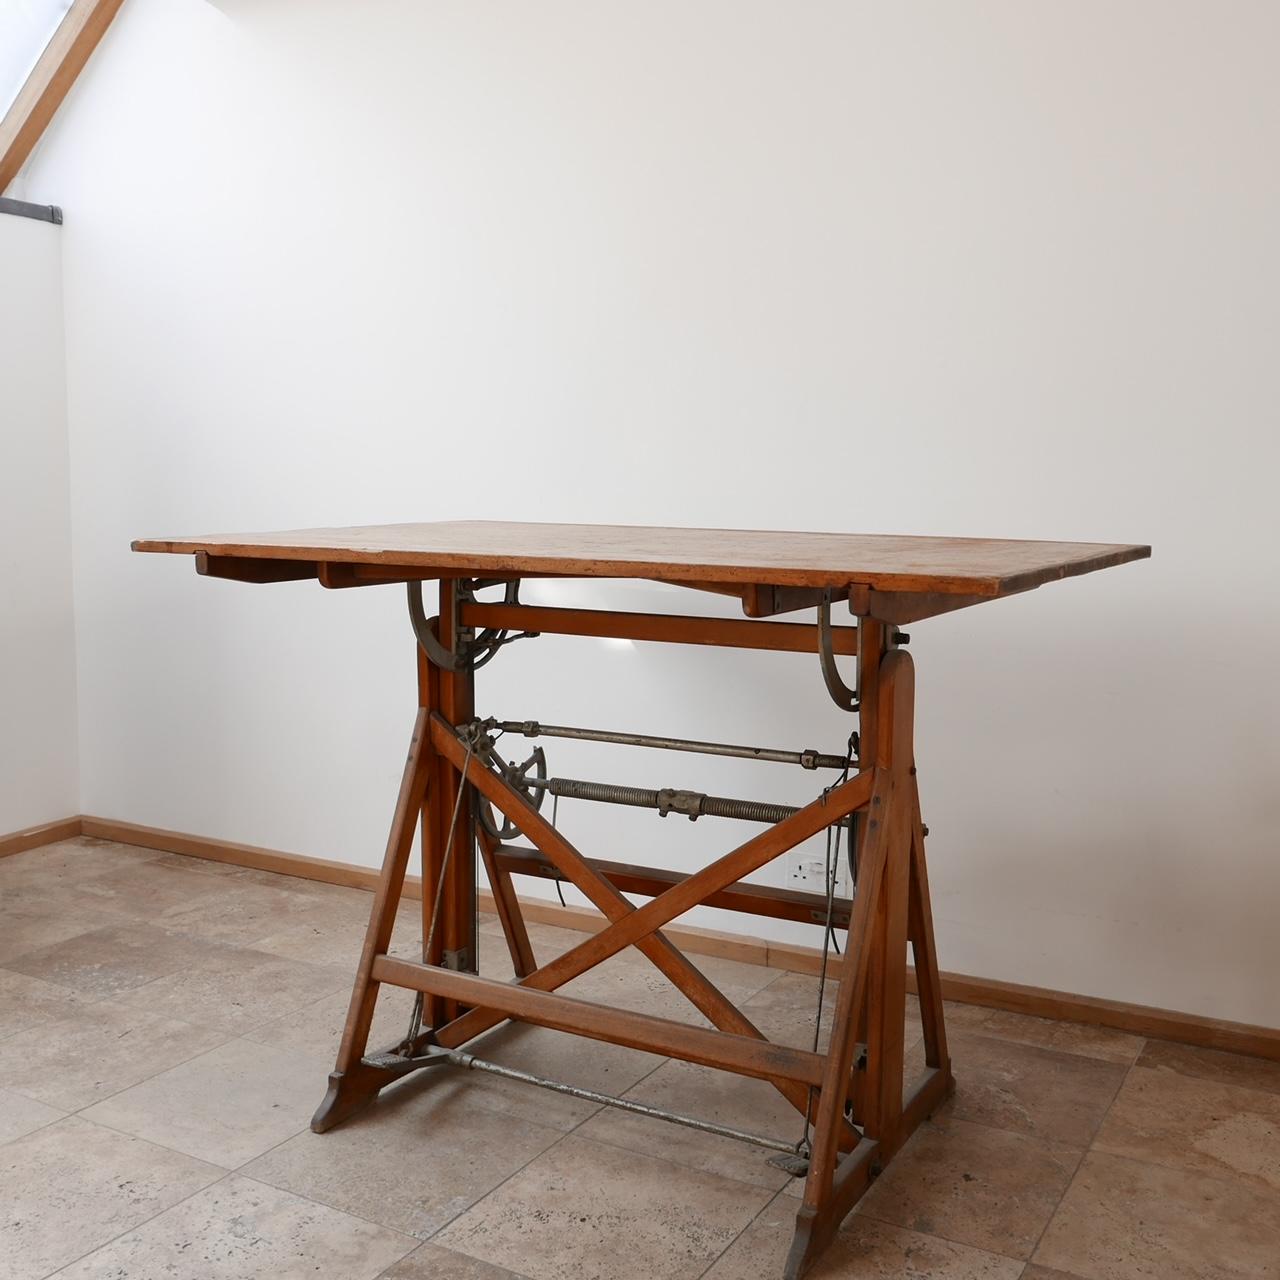 An adjustable desk or table. 

Italy, circa 1950s. 

Wooden and metal construction. 

Makers mark to base - 